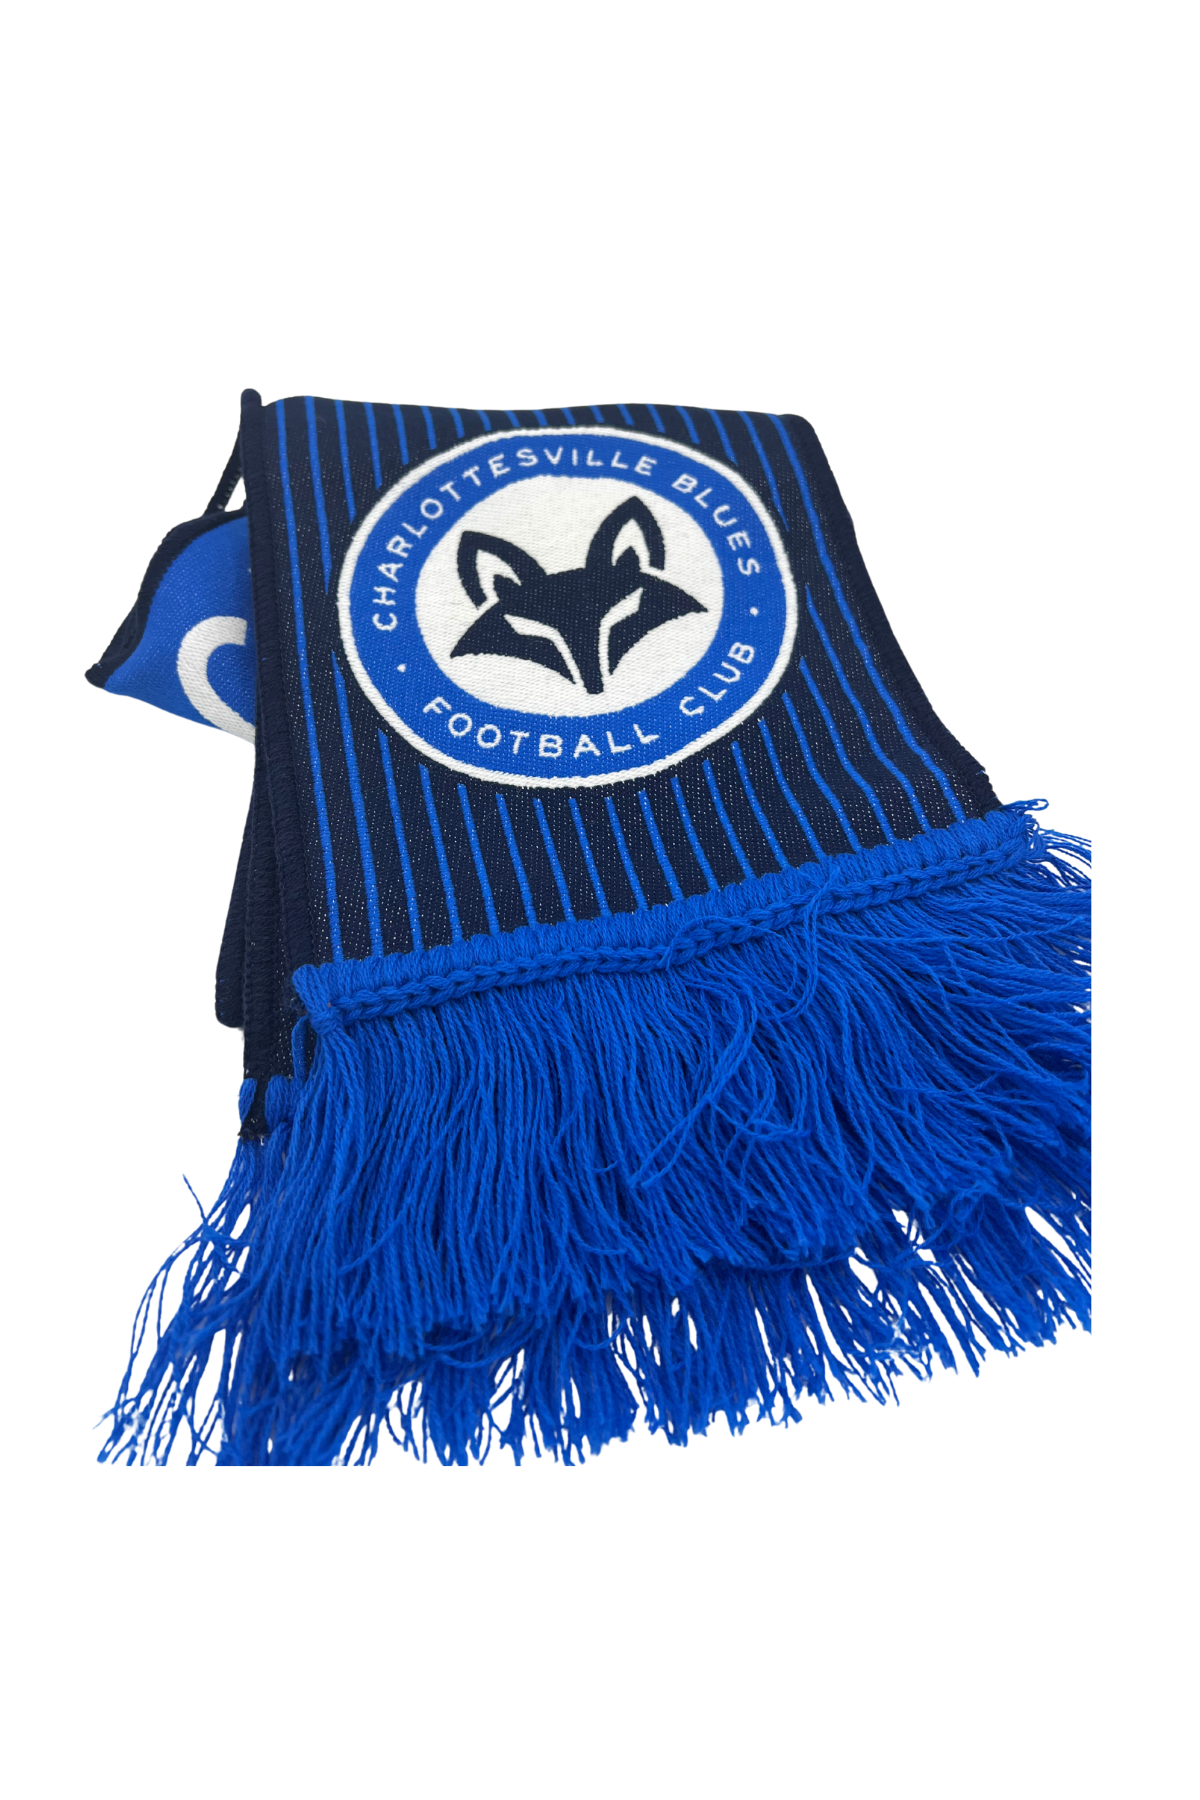 CVL Blues Official Brand Reveal Winter Scarf